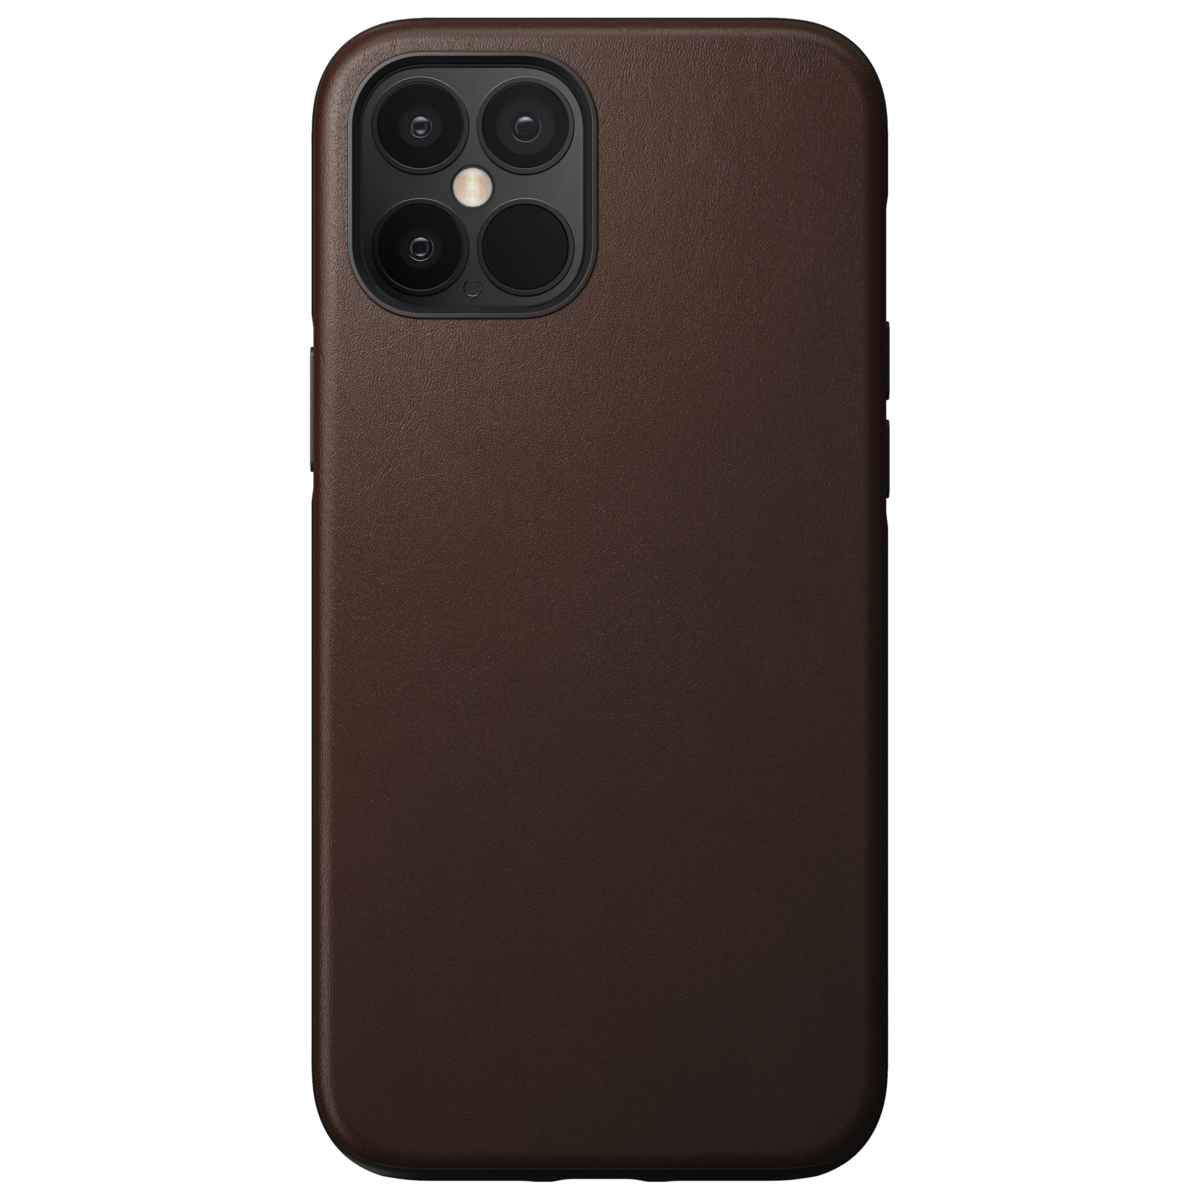 Nomad Rugged Case Rustic Brown Leather für iPhone 12 Pro Max